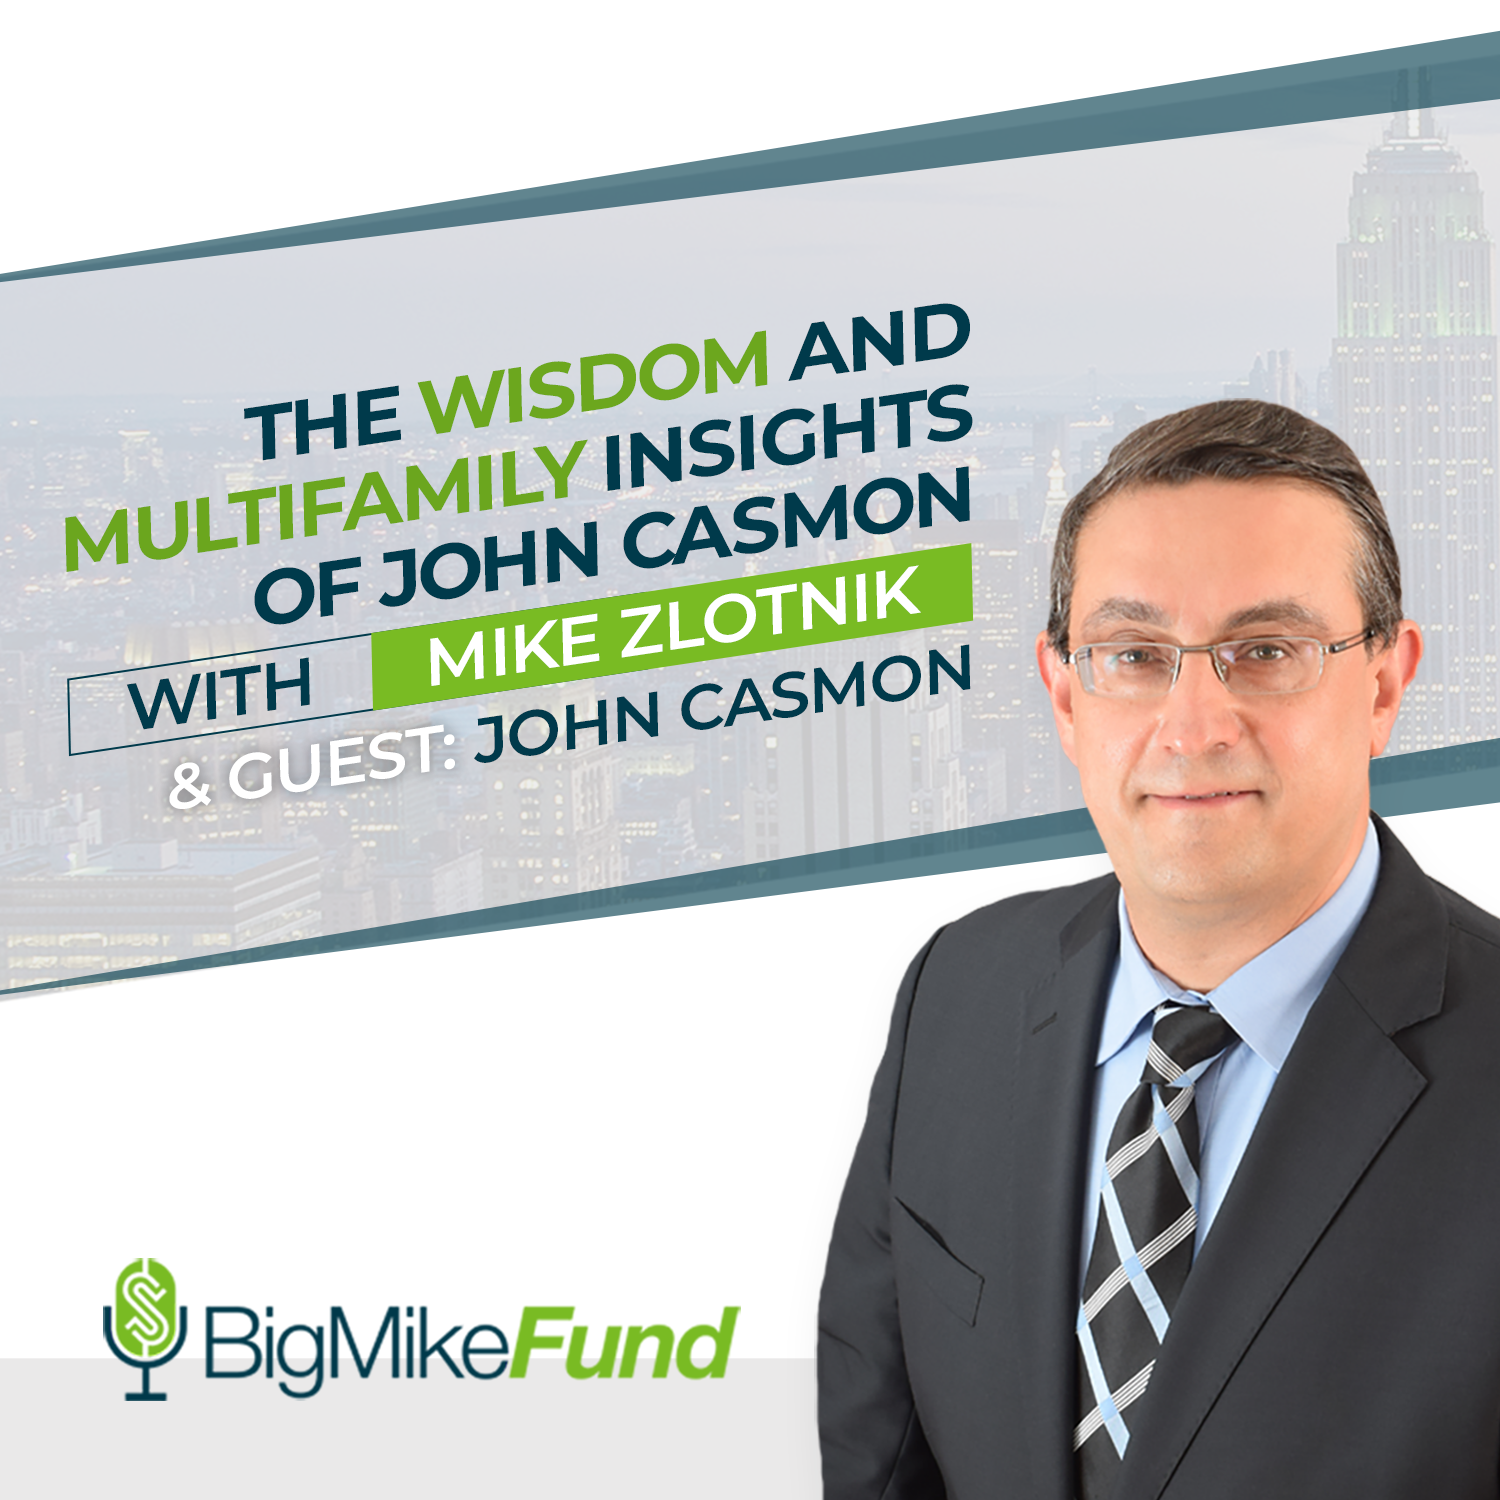 123: The Wisdom and Multifamily Insights of John Casmon